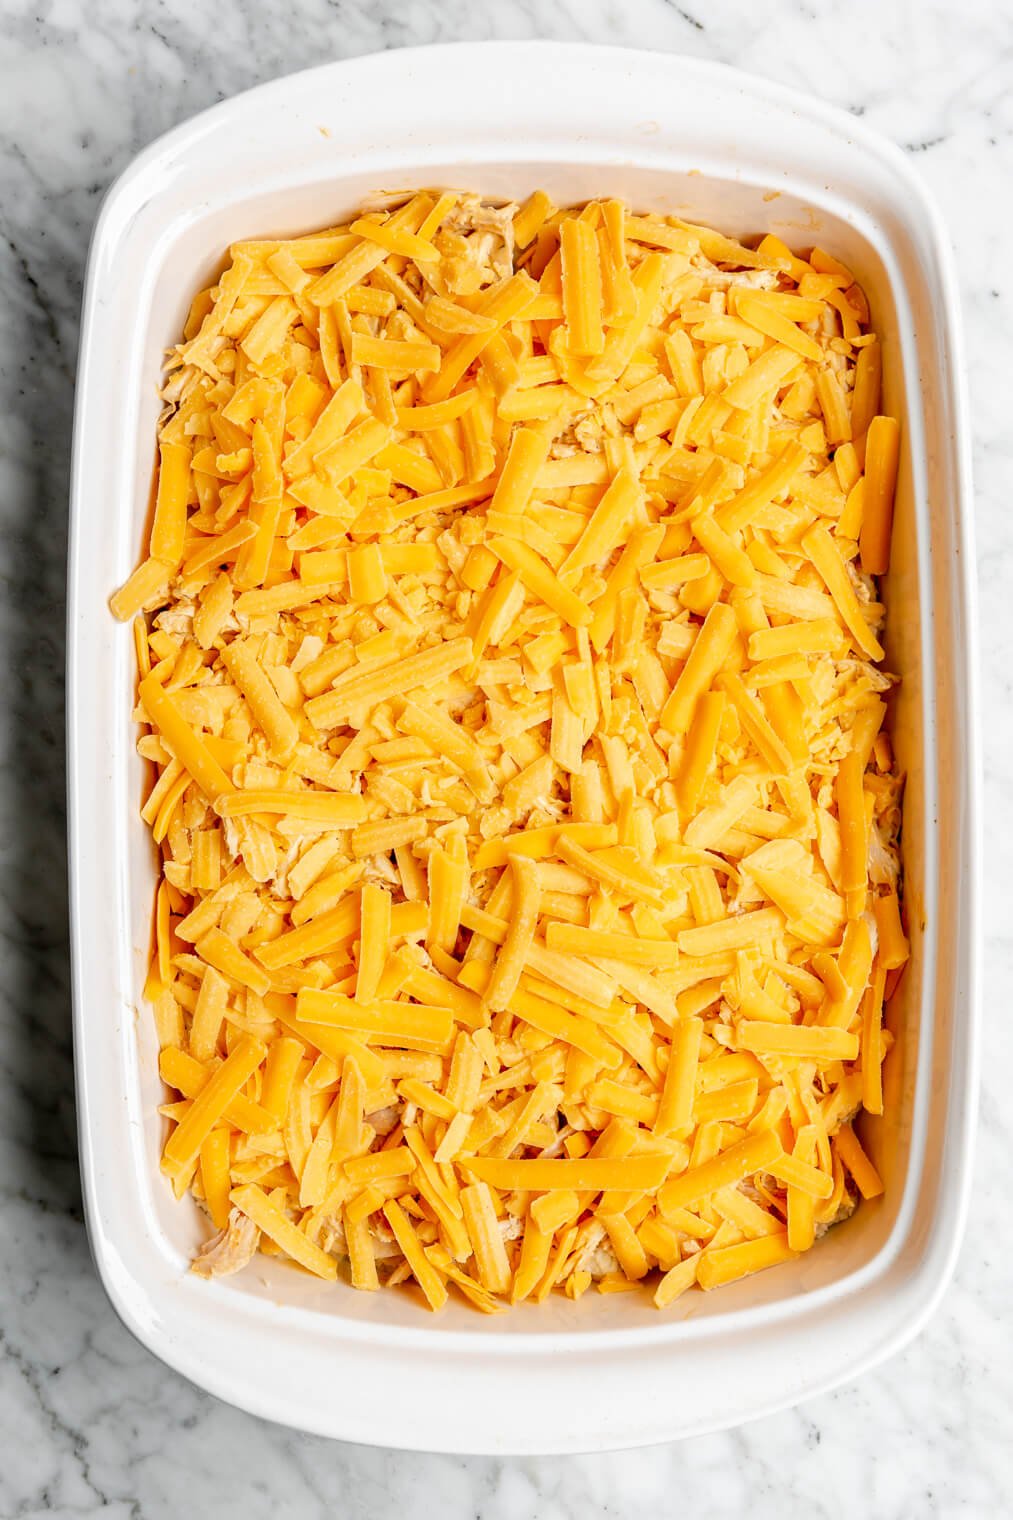 Cheese spread on top of filling in a white casserole dish.